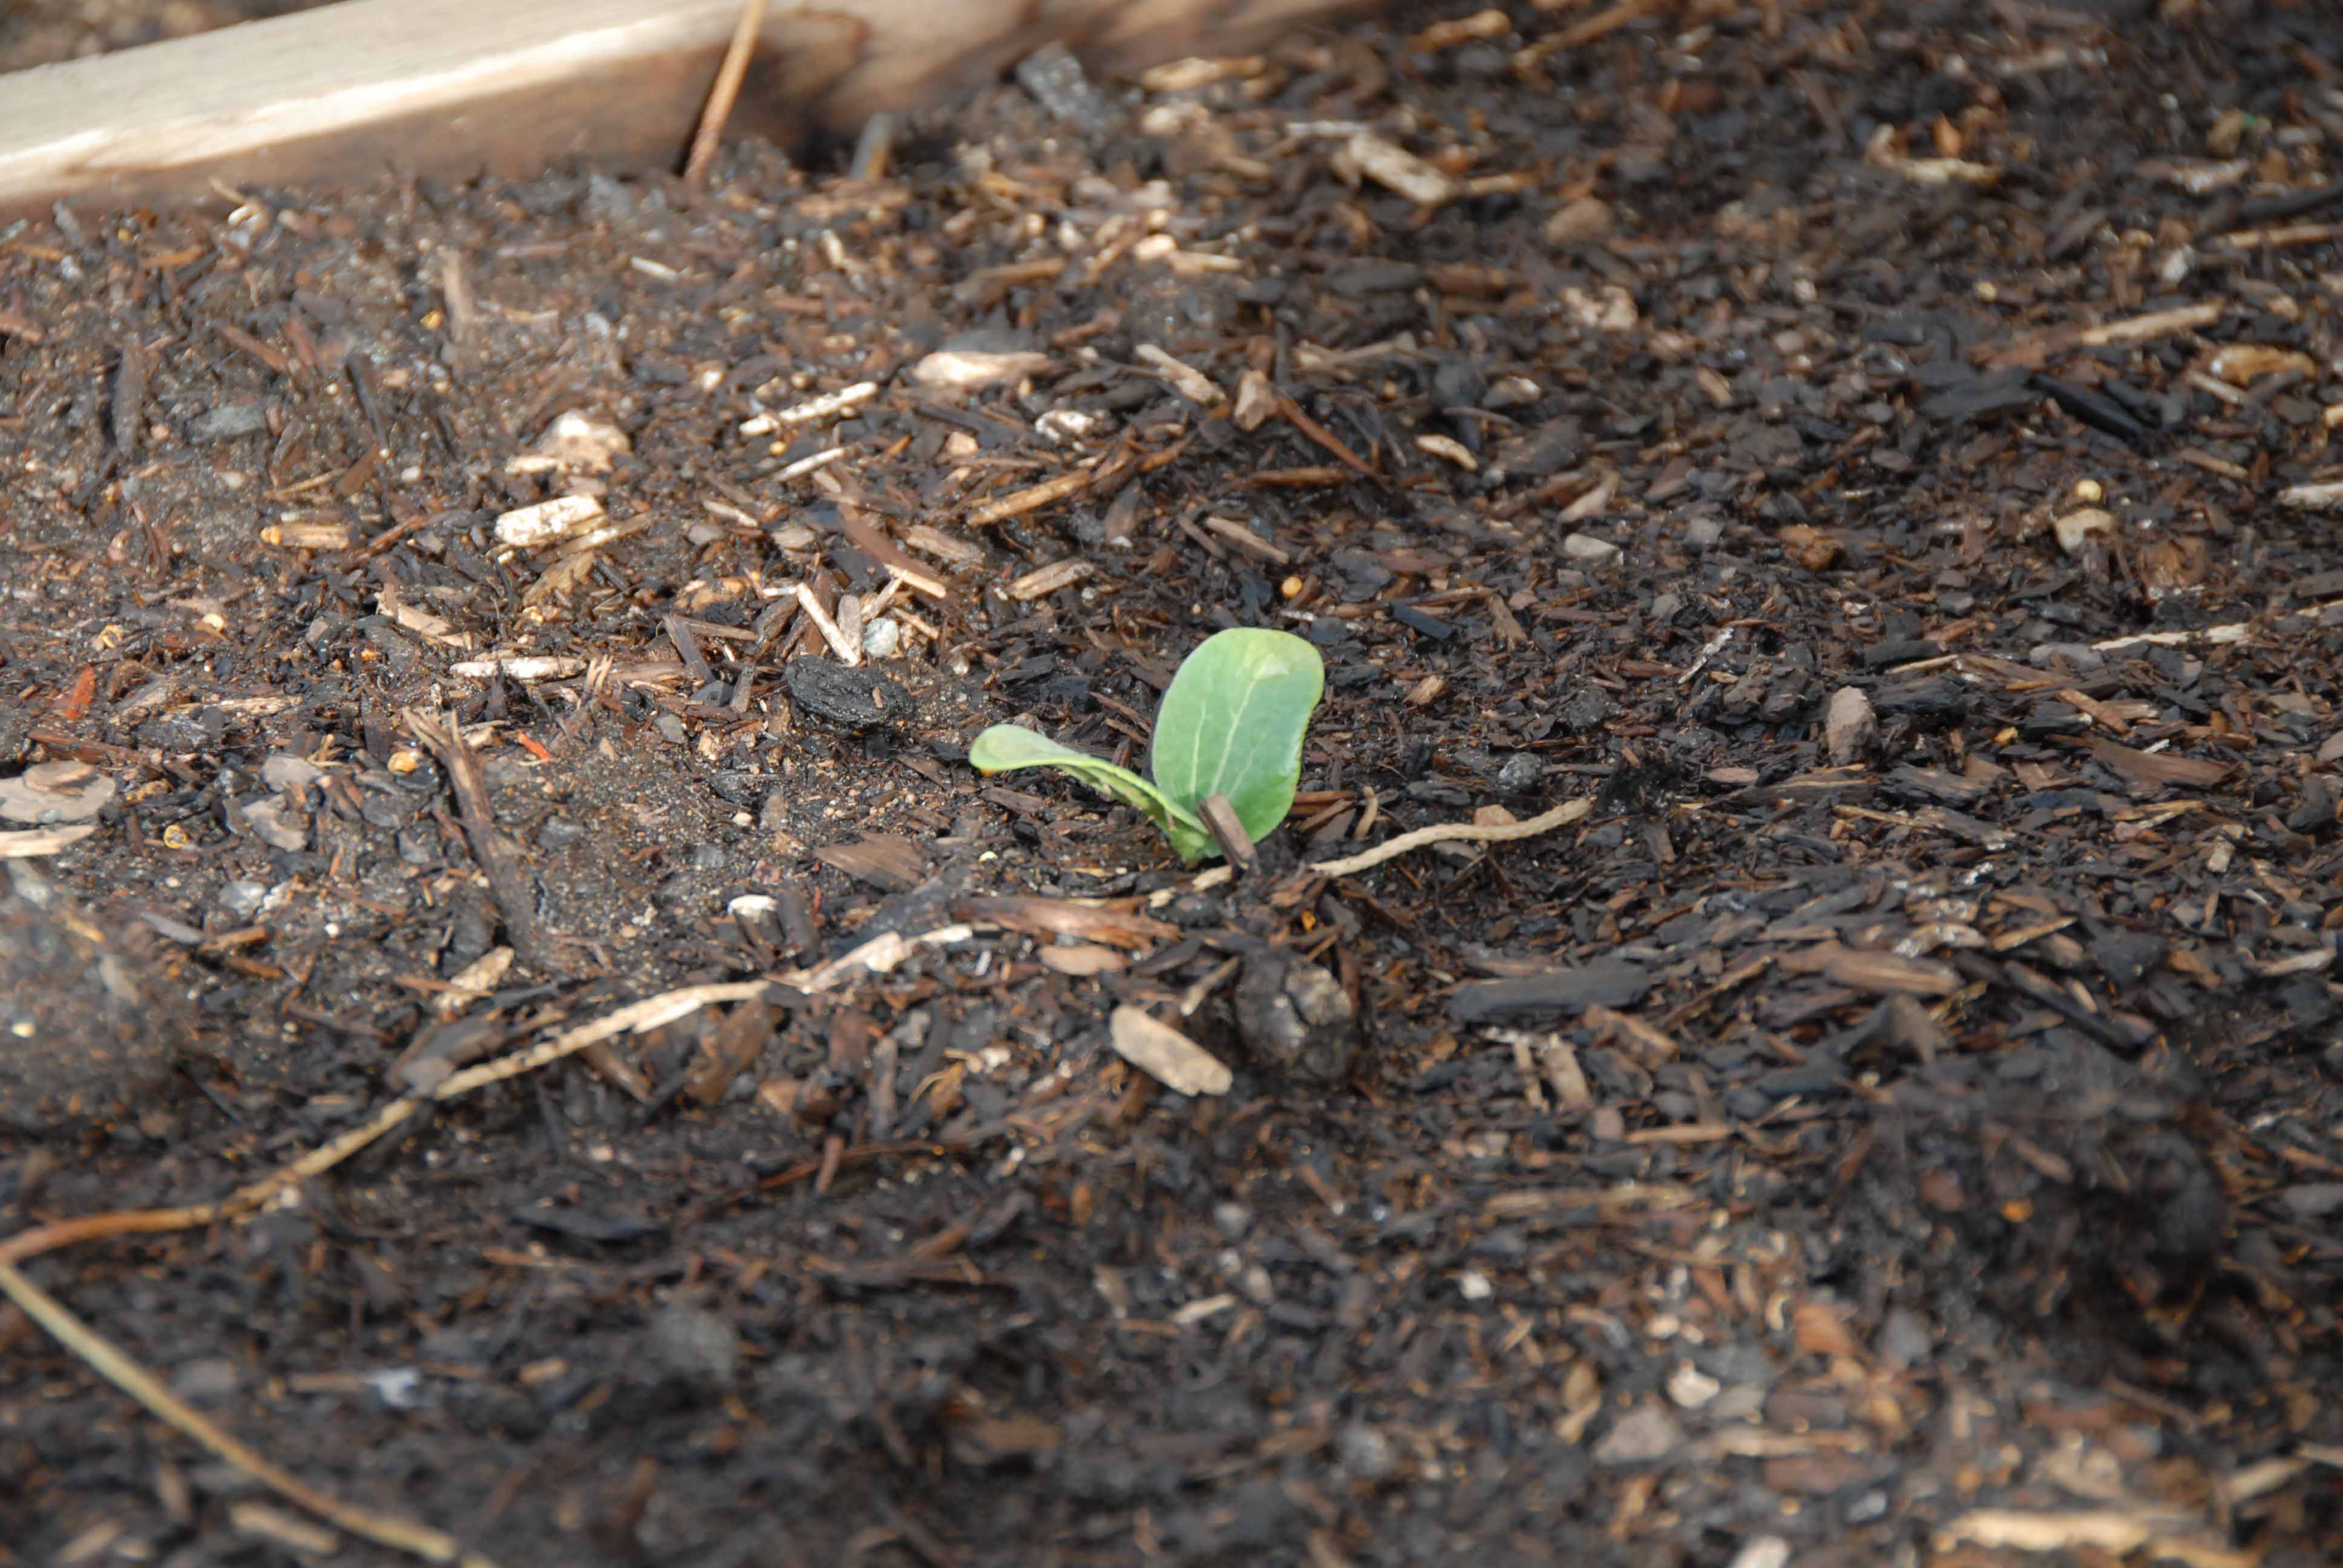 The zucchini are all sprouted but 1. Pretty good odds for seeds!